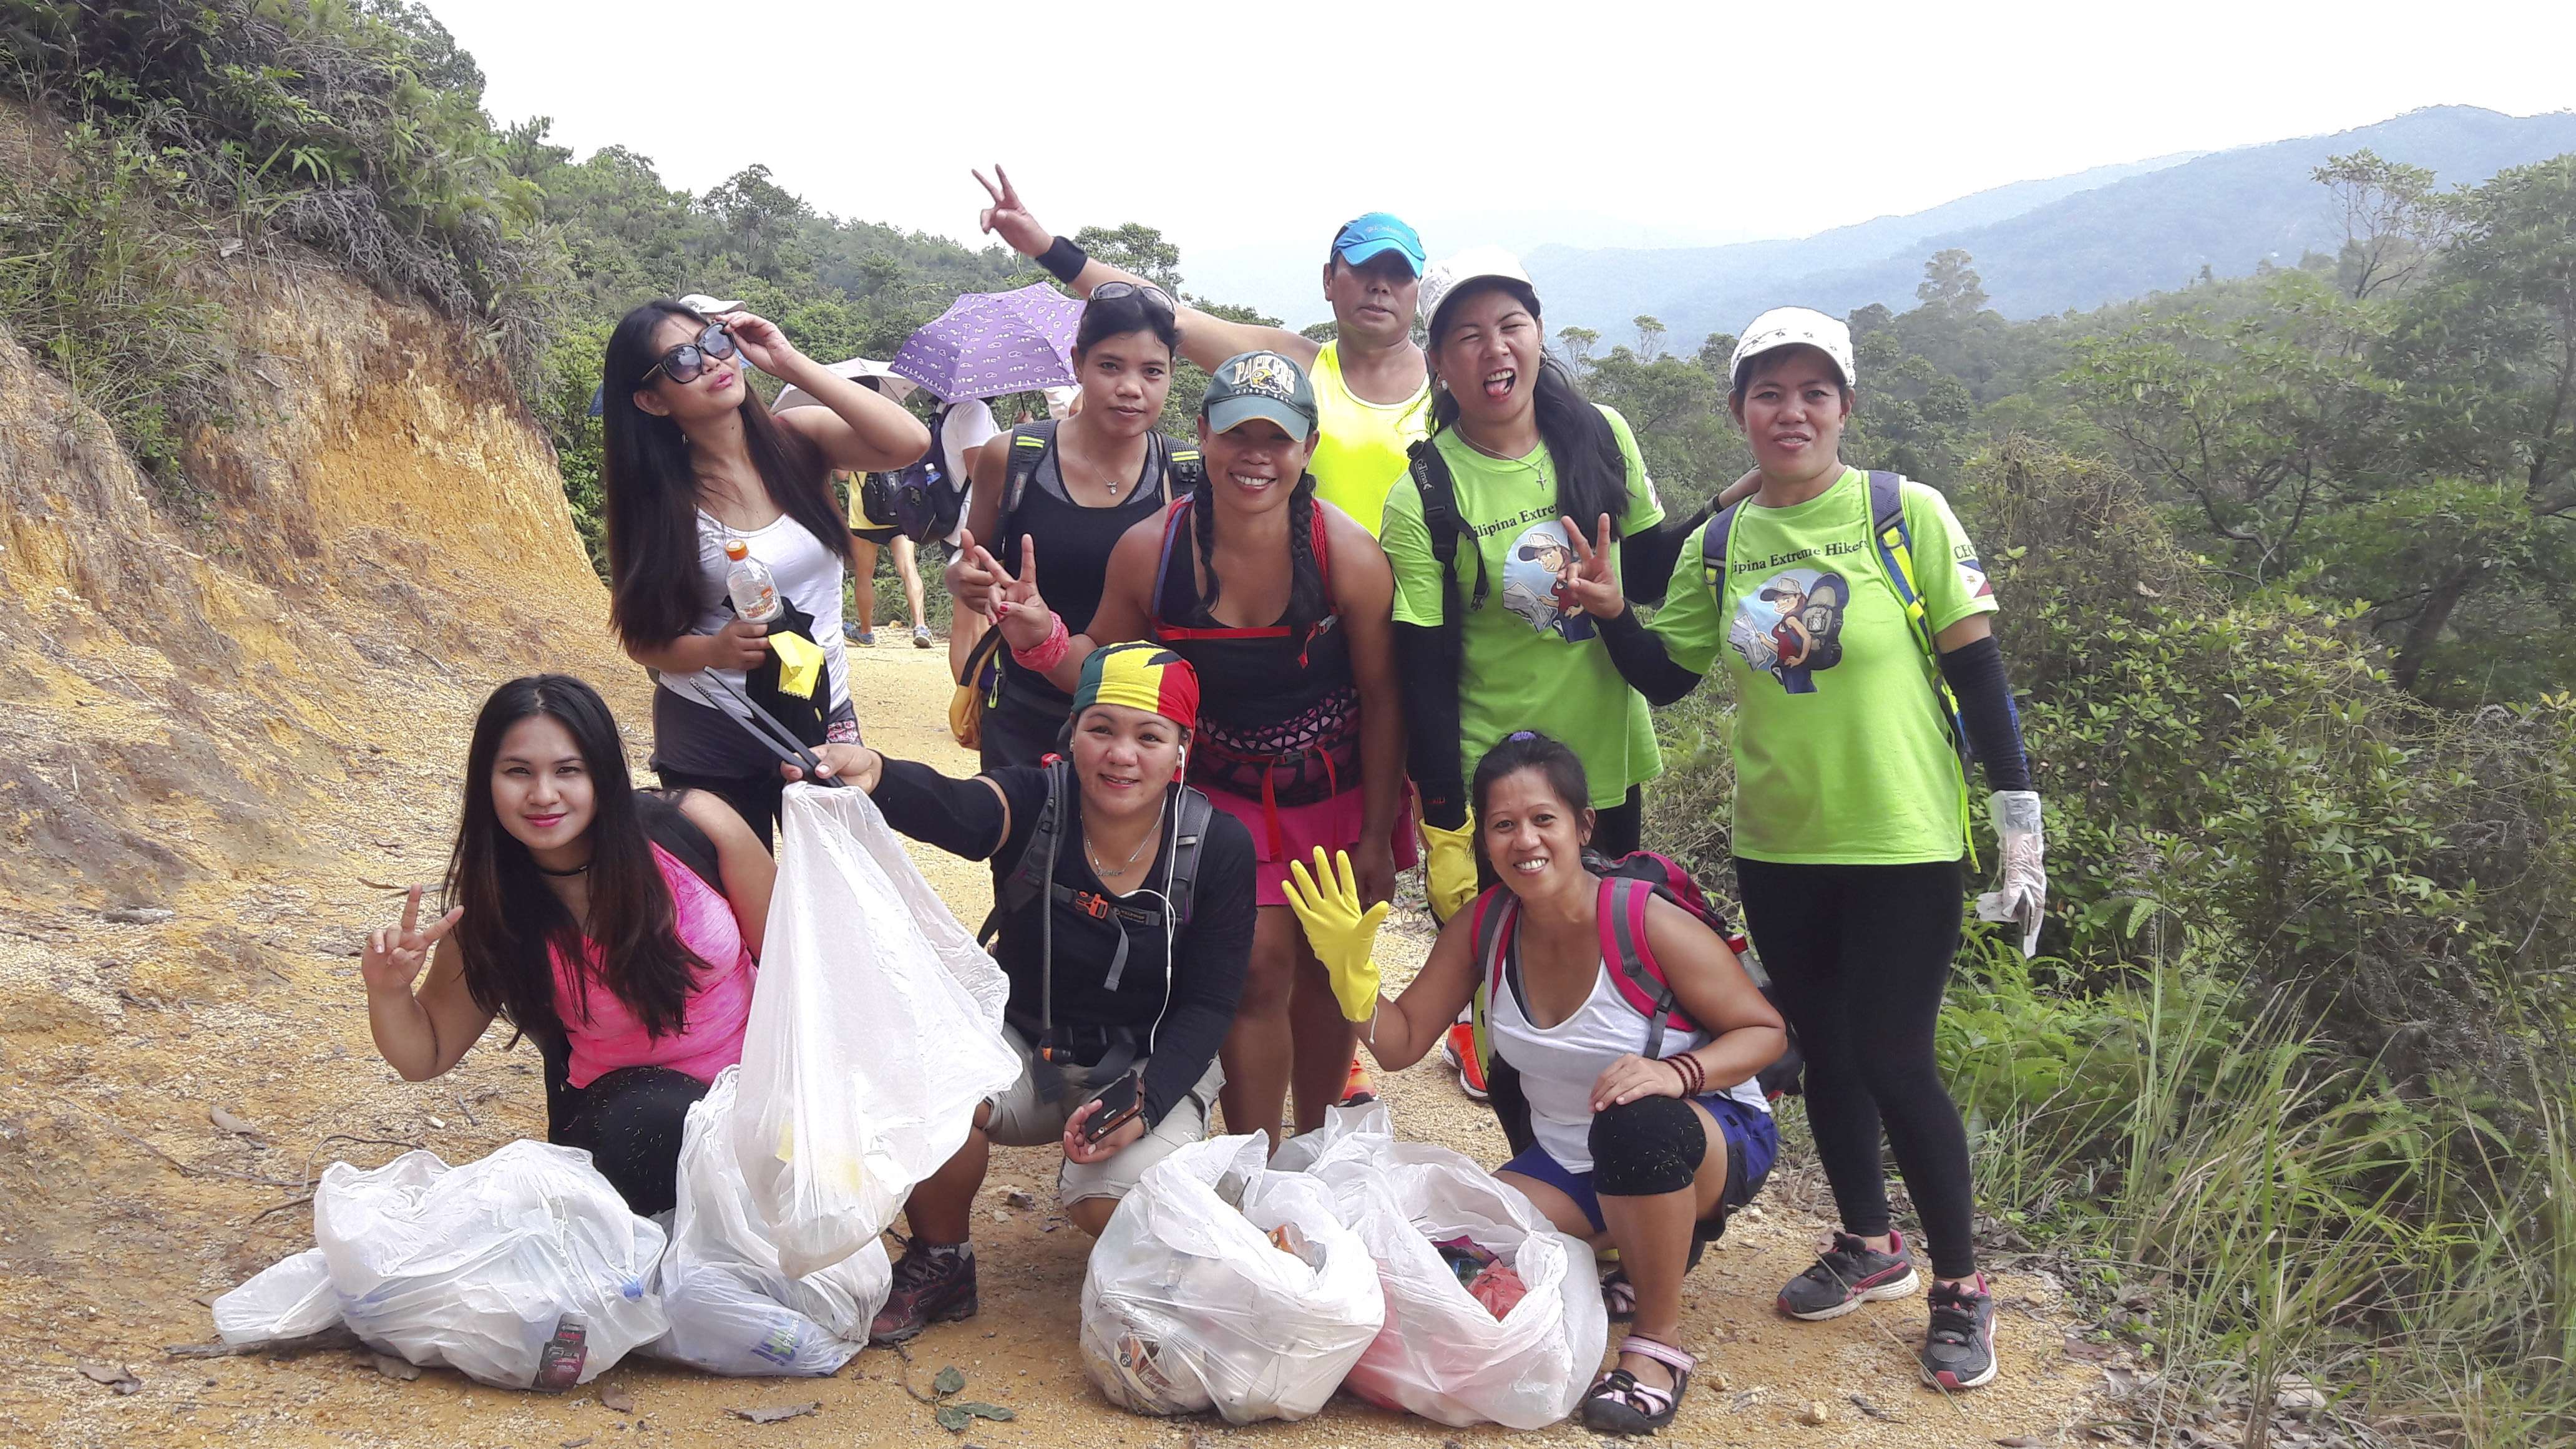 Liza Avelino (centre in cap and pink shorts) and her cleanup team.